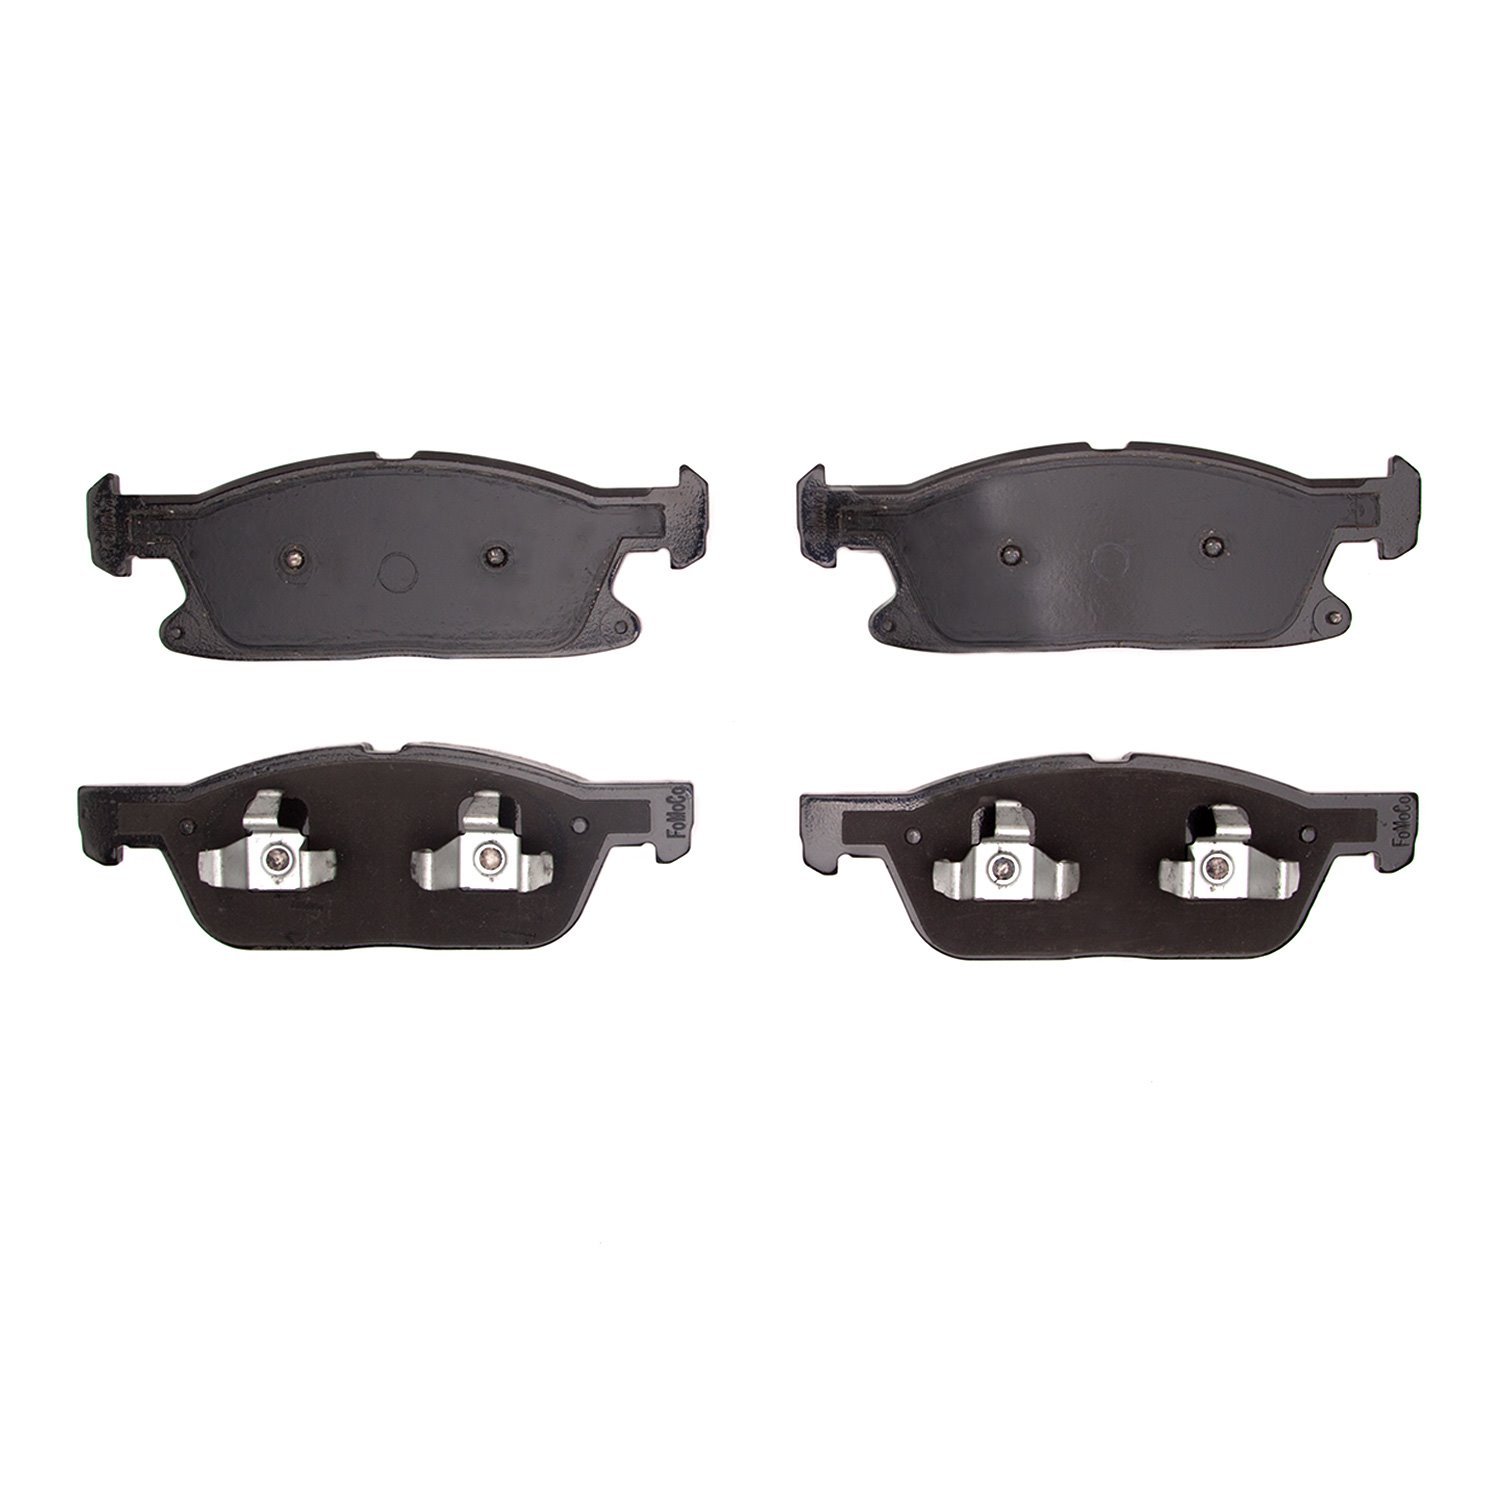 1552-2180-00 5000 Advanced Low-Metallic Brake Pads, Fits Select Ford/Lincoln/Mercury/Mazda, Position: Front